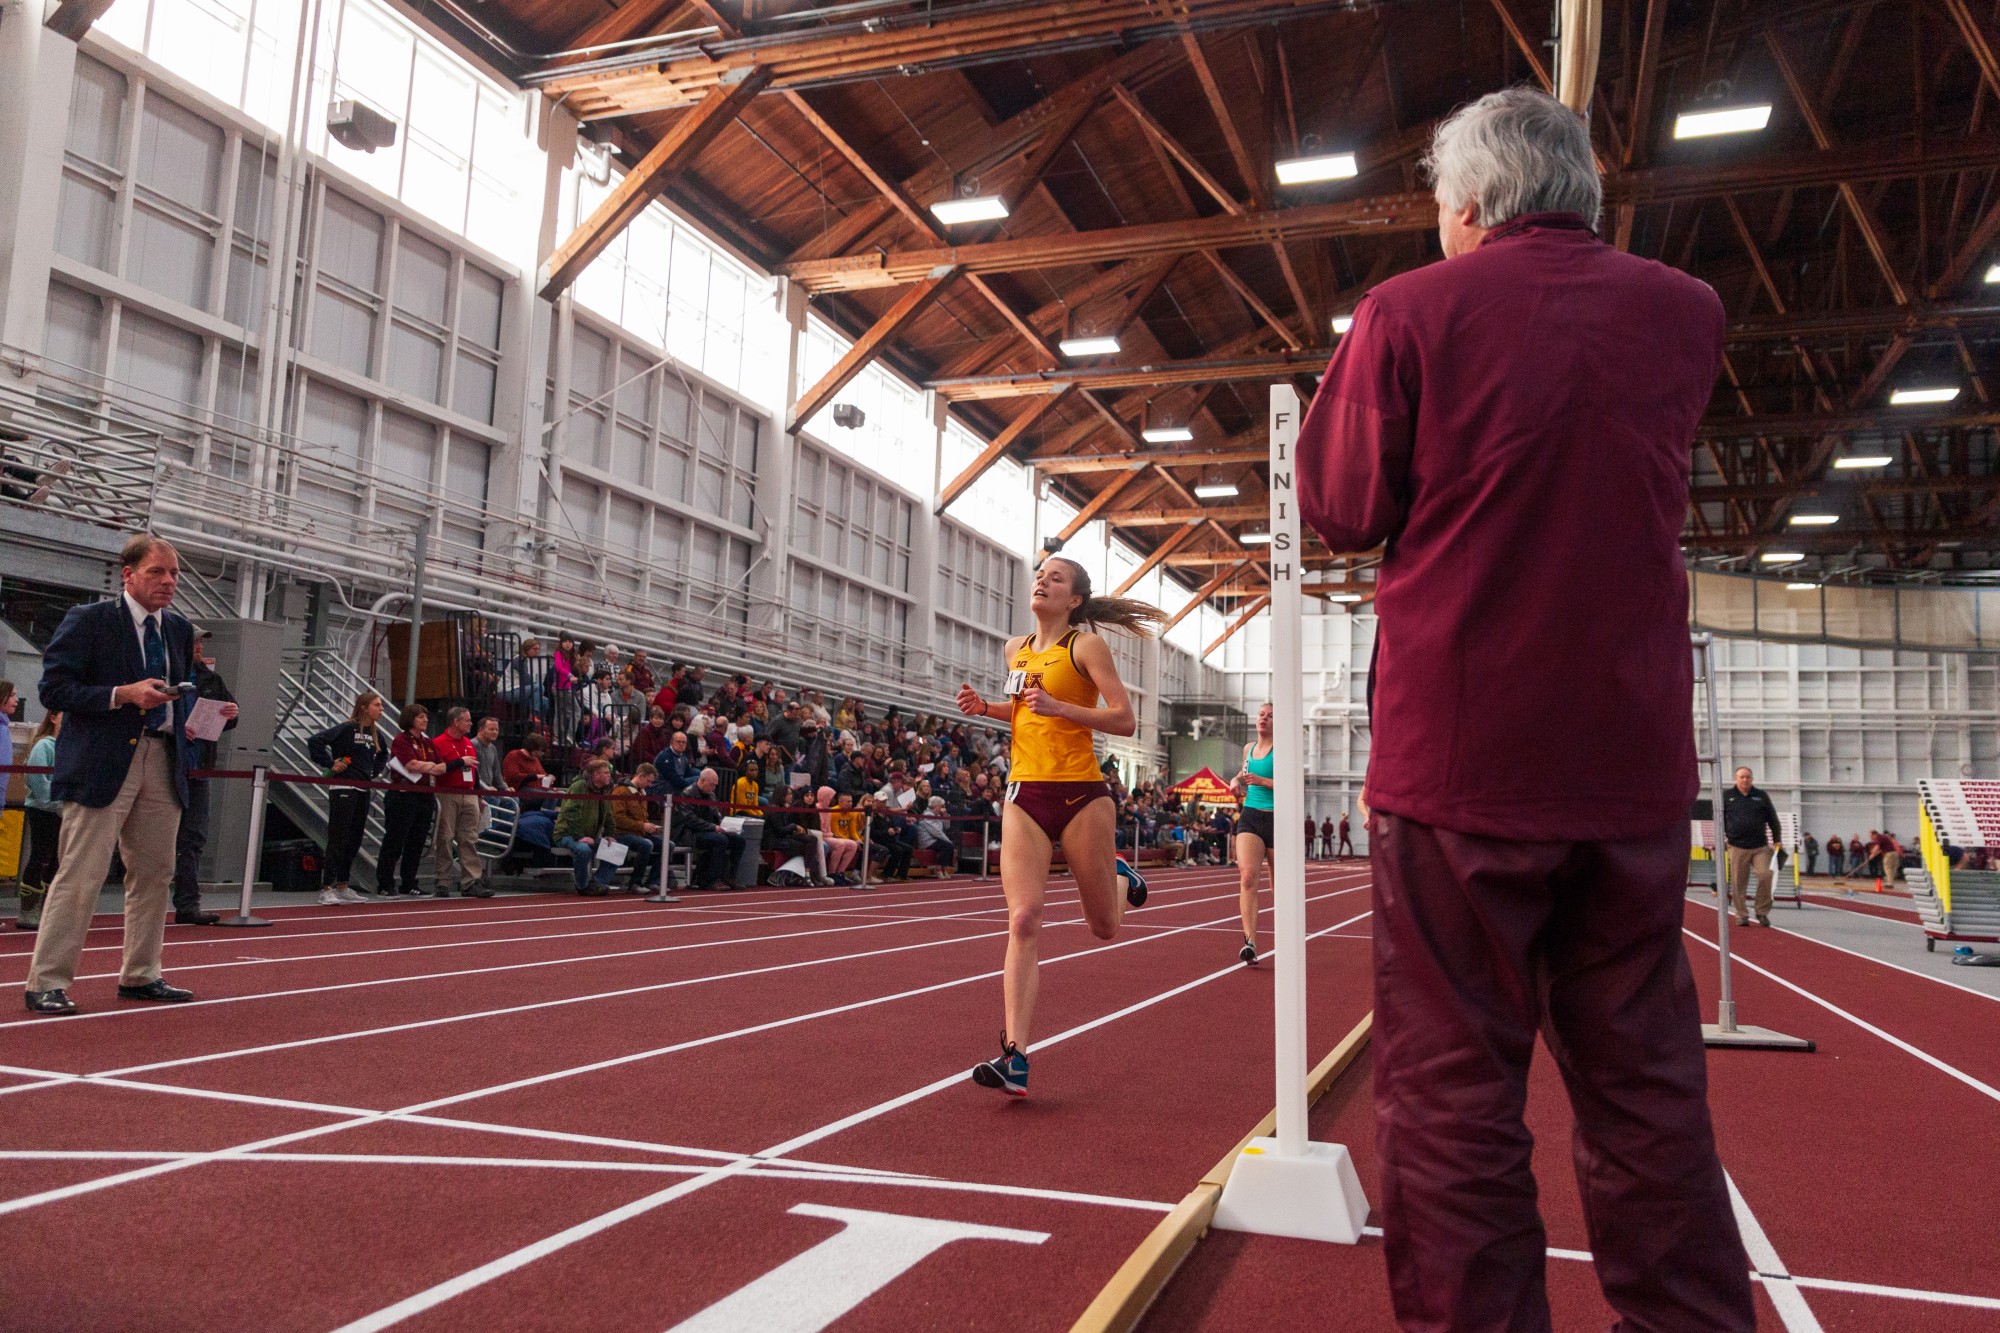 Gophers Redshirt Freshman Taylor Krone crosses the finish line of the mile run at the Minnesota Cold Classic at the University of Minnesota Fieldhouse on Friday, Feb. 21.